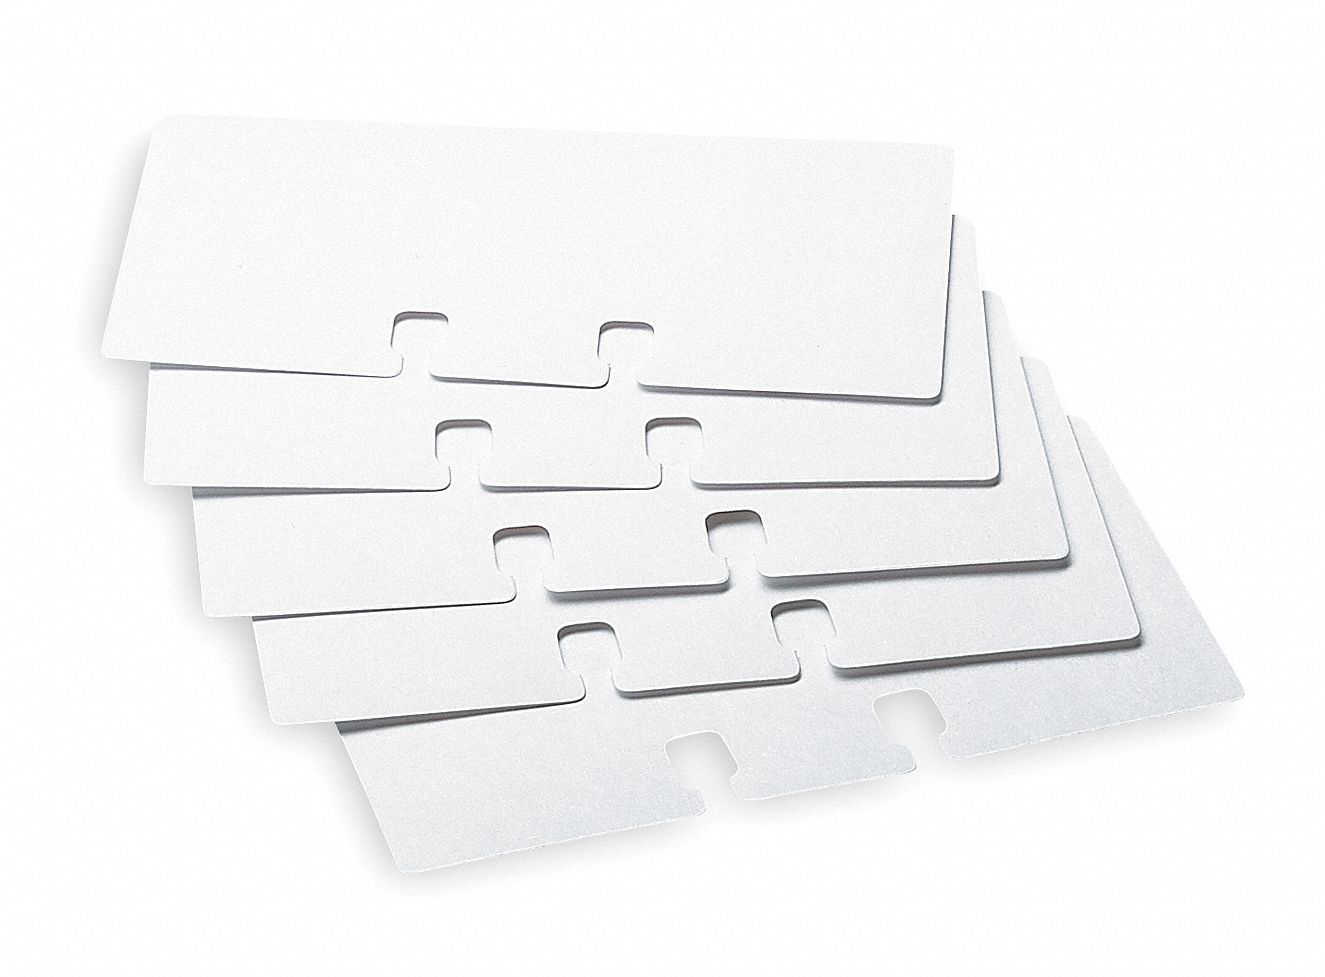 Business Card Refills: White, 2 1/4 in Lg, 4 in Wd, (100) 2-1/4 x 4 in Plain Refills, 100 PK